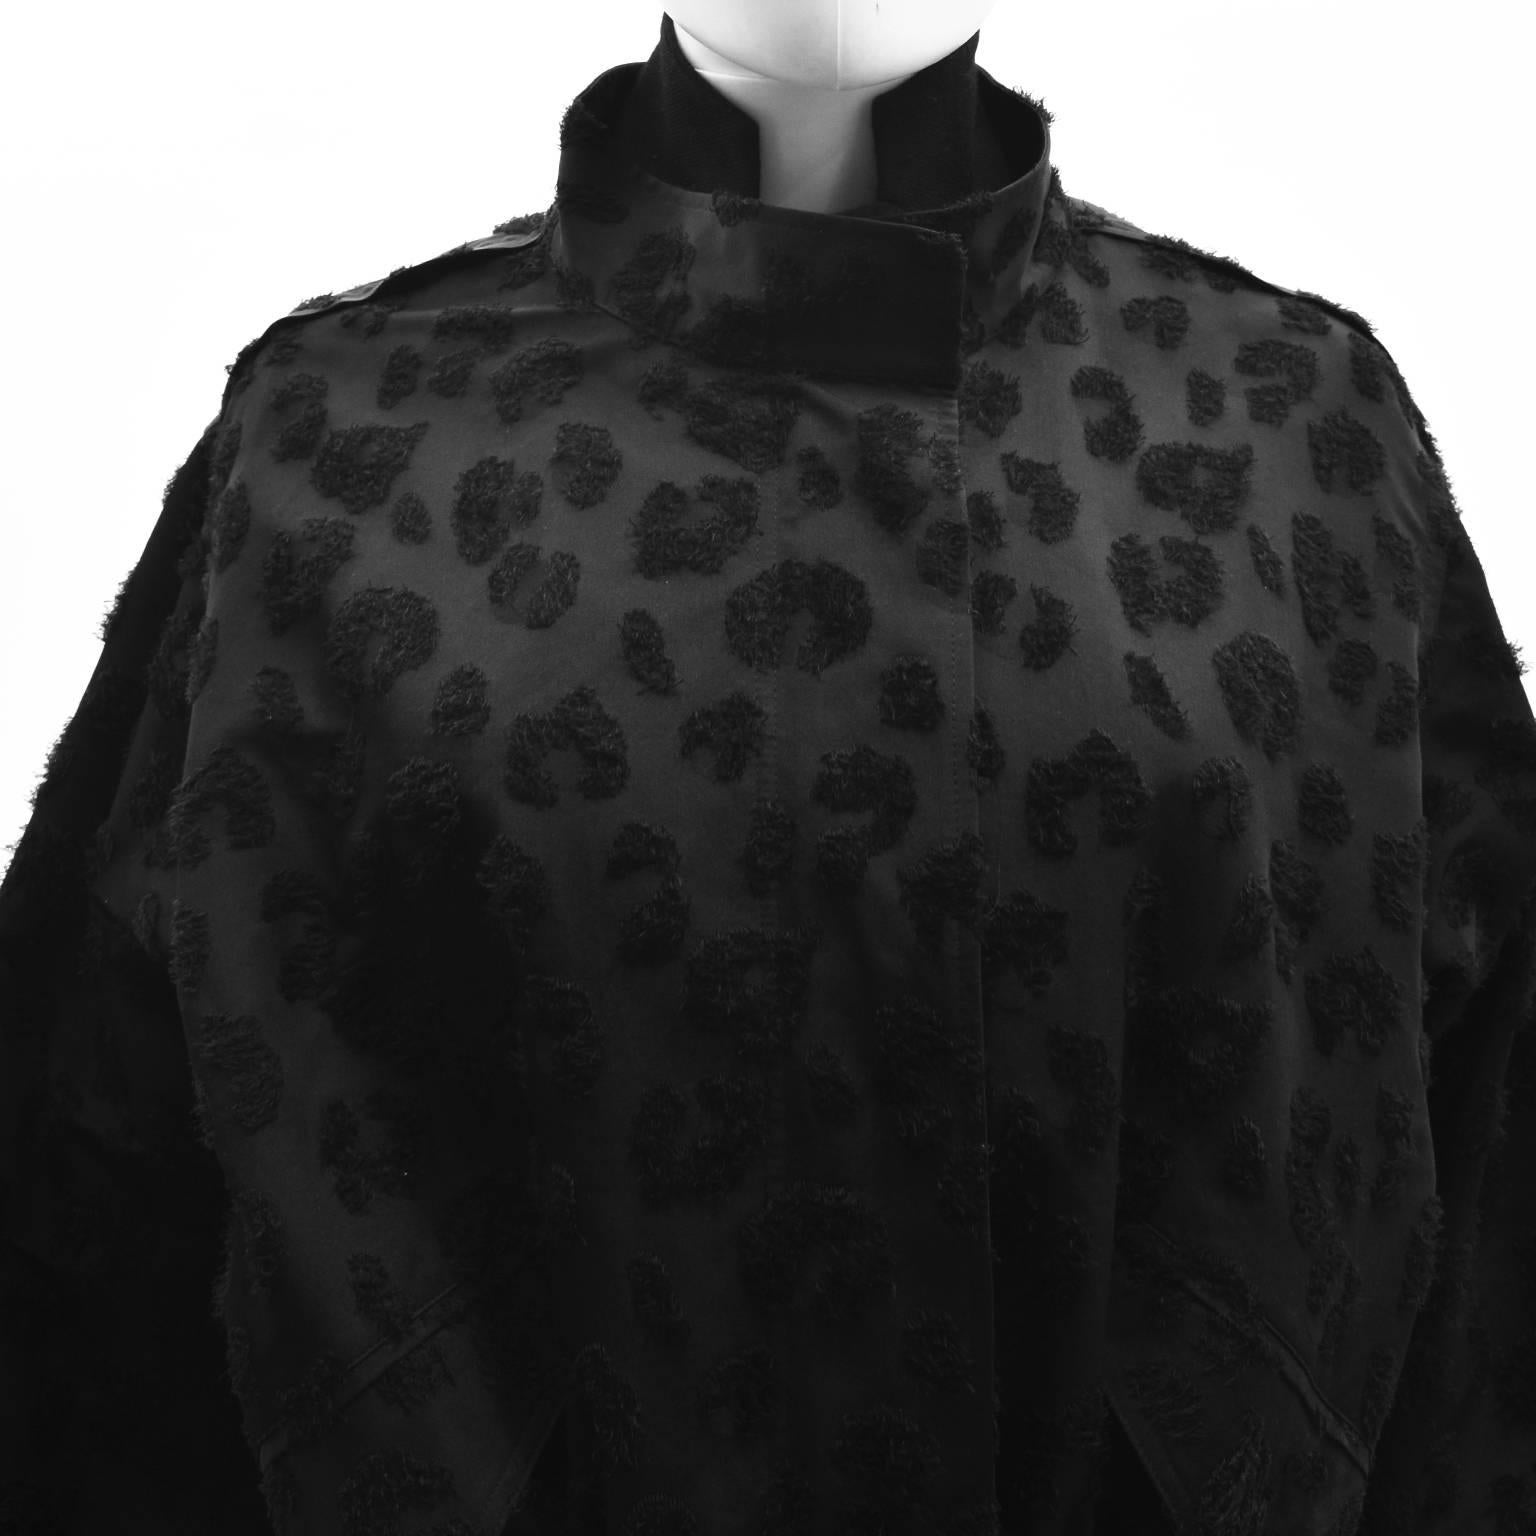 A unusual and sporty black coat from Phillip Lim with a double layer design. The coat is made from a black outer layer with an all over textured fluffy leopard print design and a second thinner layer on the inside that is attached with a zip along